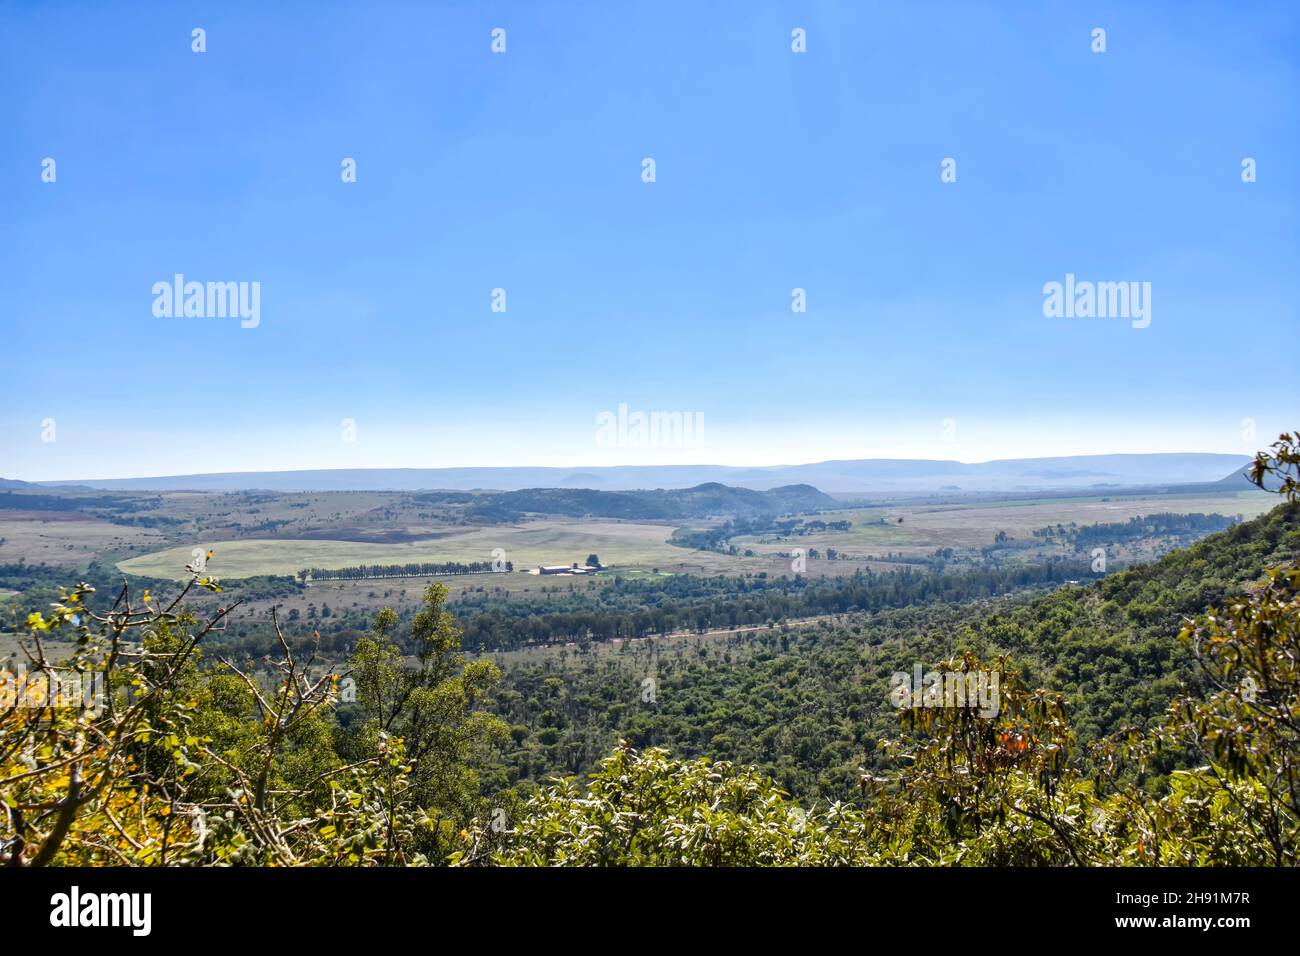 A view of the horizon with its agricultural fields and forests seen from the hills near the Wilge River in Trichardspoort River Valley, Gouwsberg Moun Stock Photo